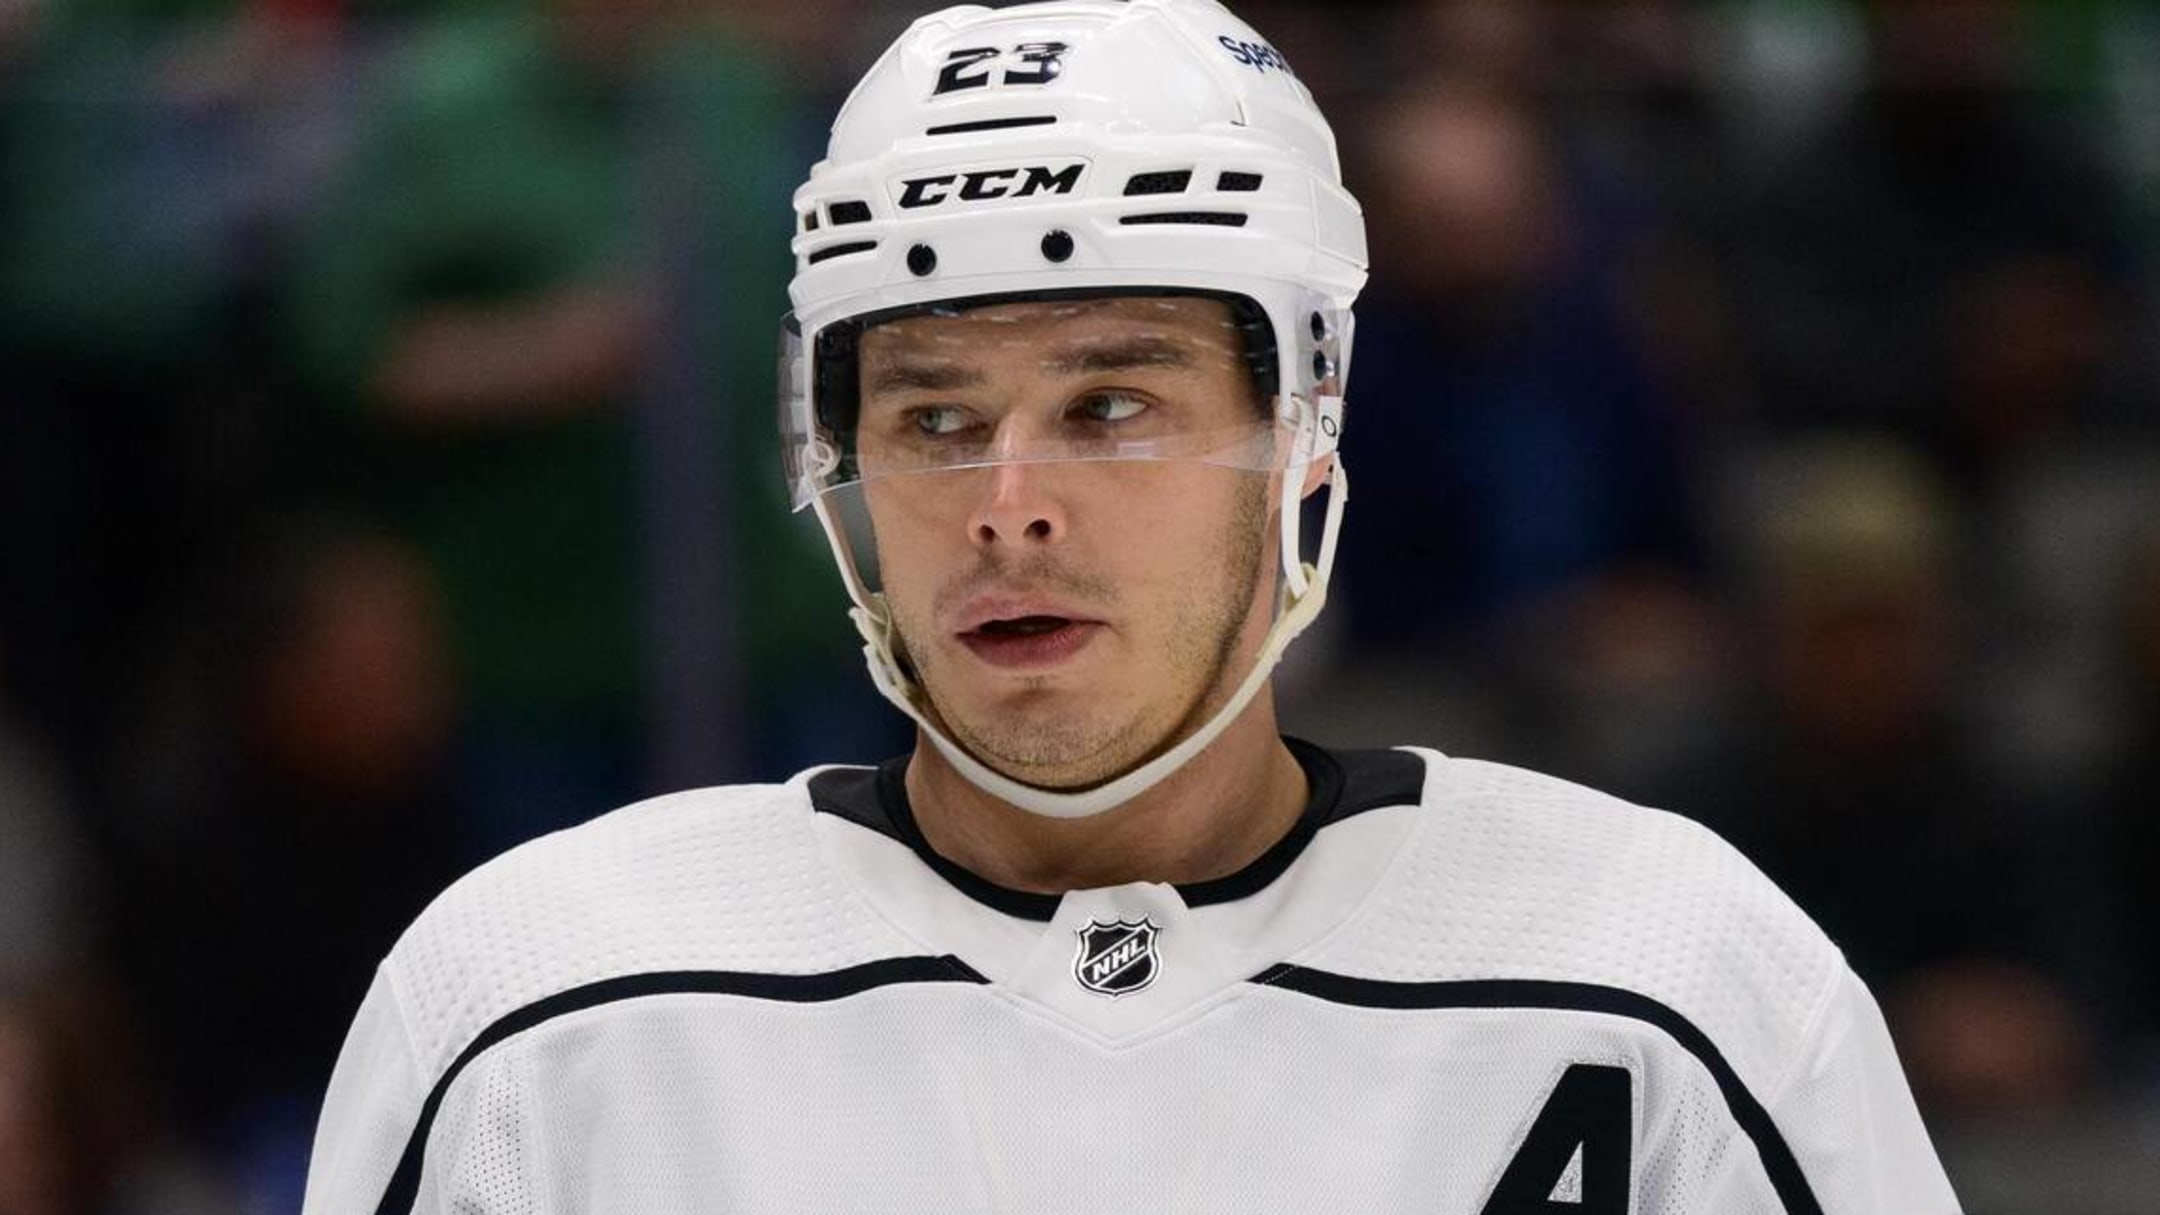 Toeing the line: Kings captain Dustin Brown plays on the edge